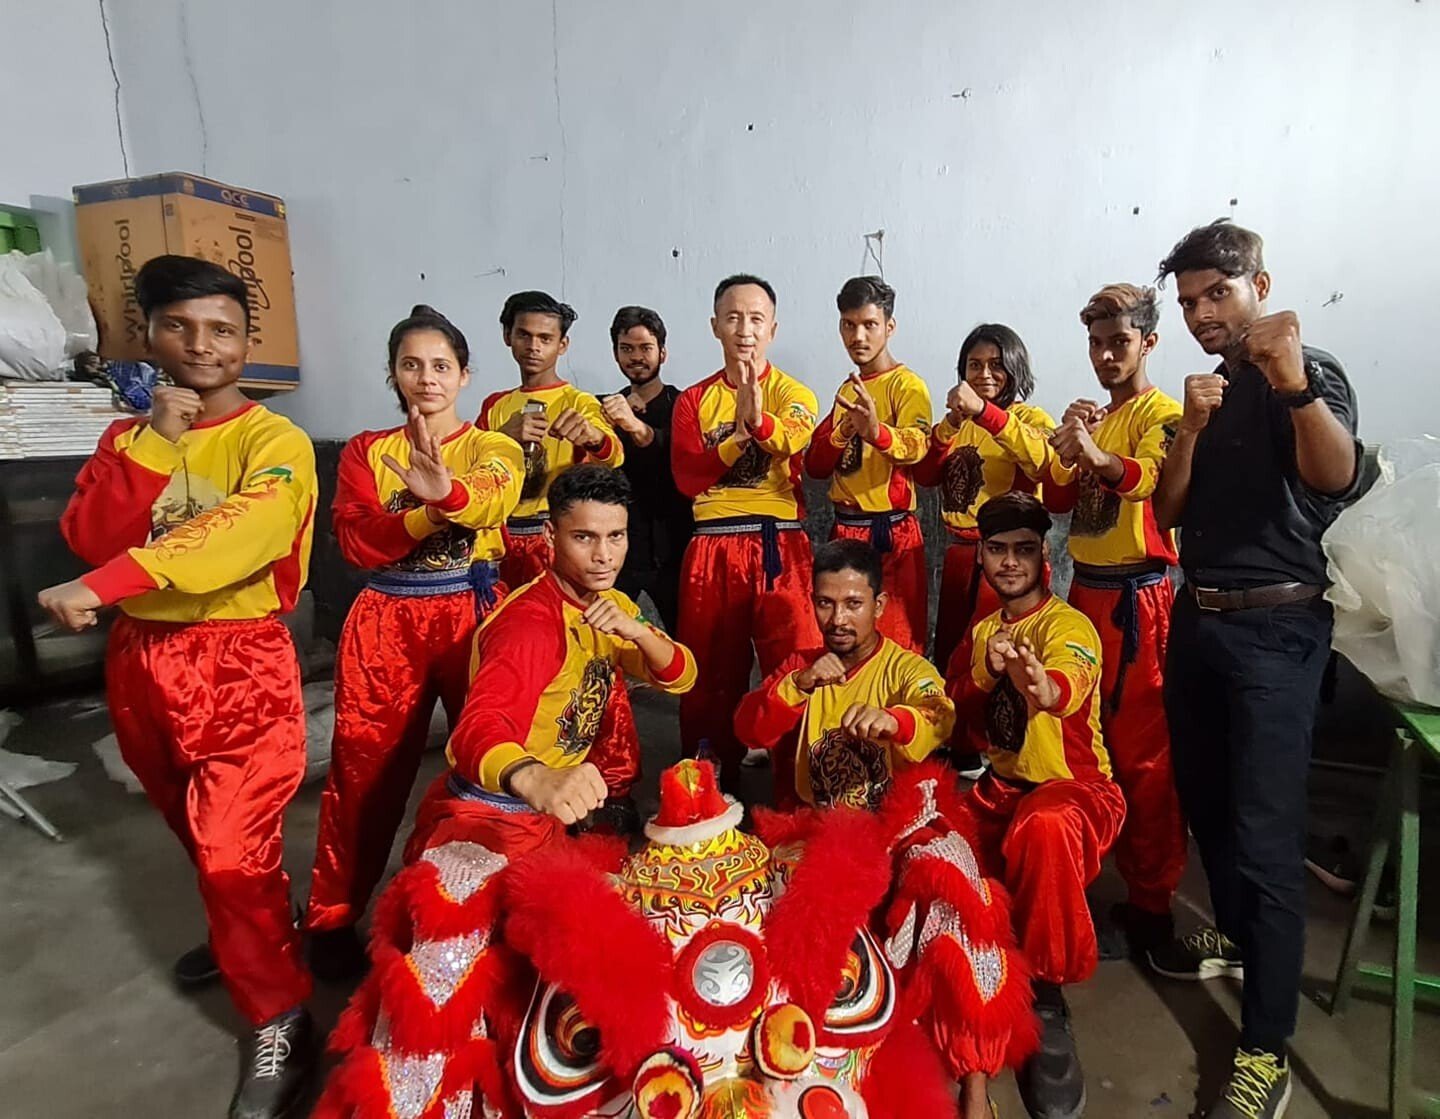 James Liao, centre, pictured with his students at the Lunar New Year celebrations in Kolkata’s Tangra Chinatown. Photo: Handout